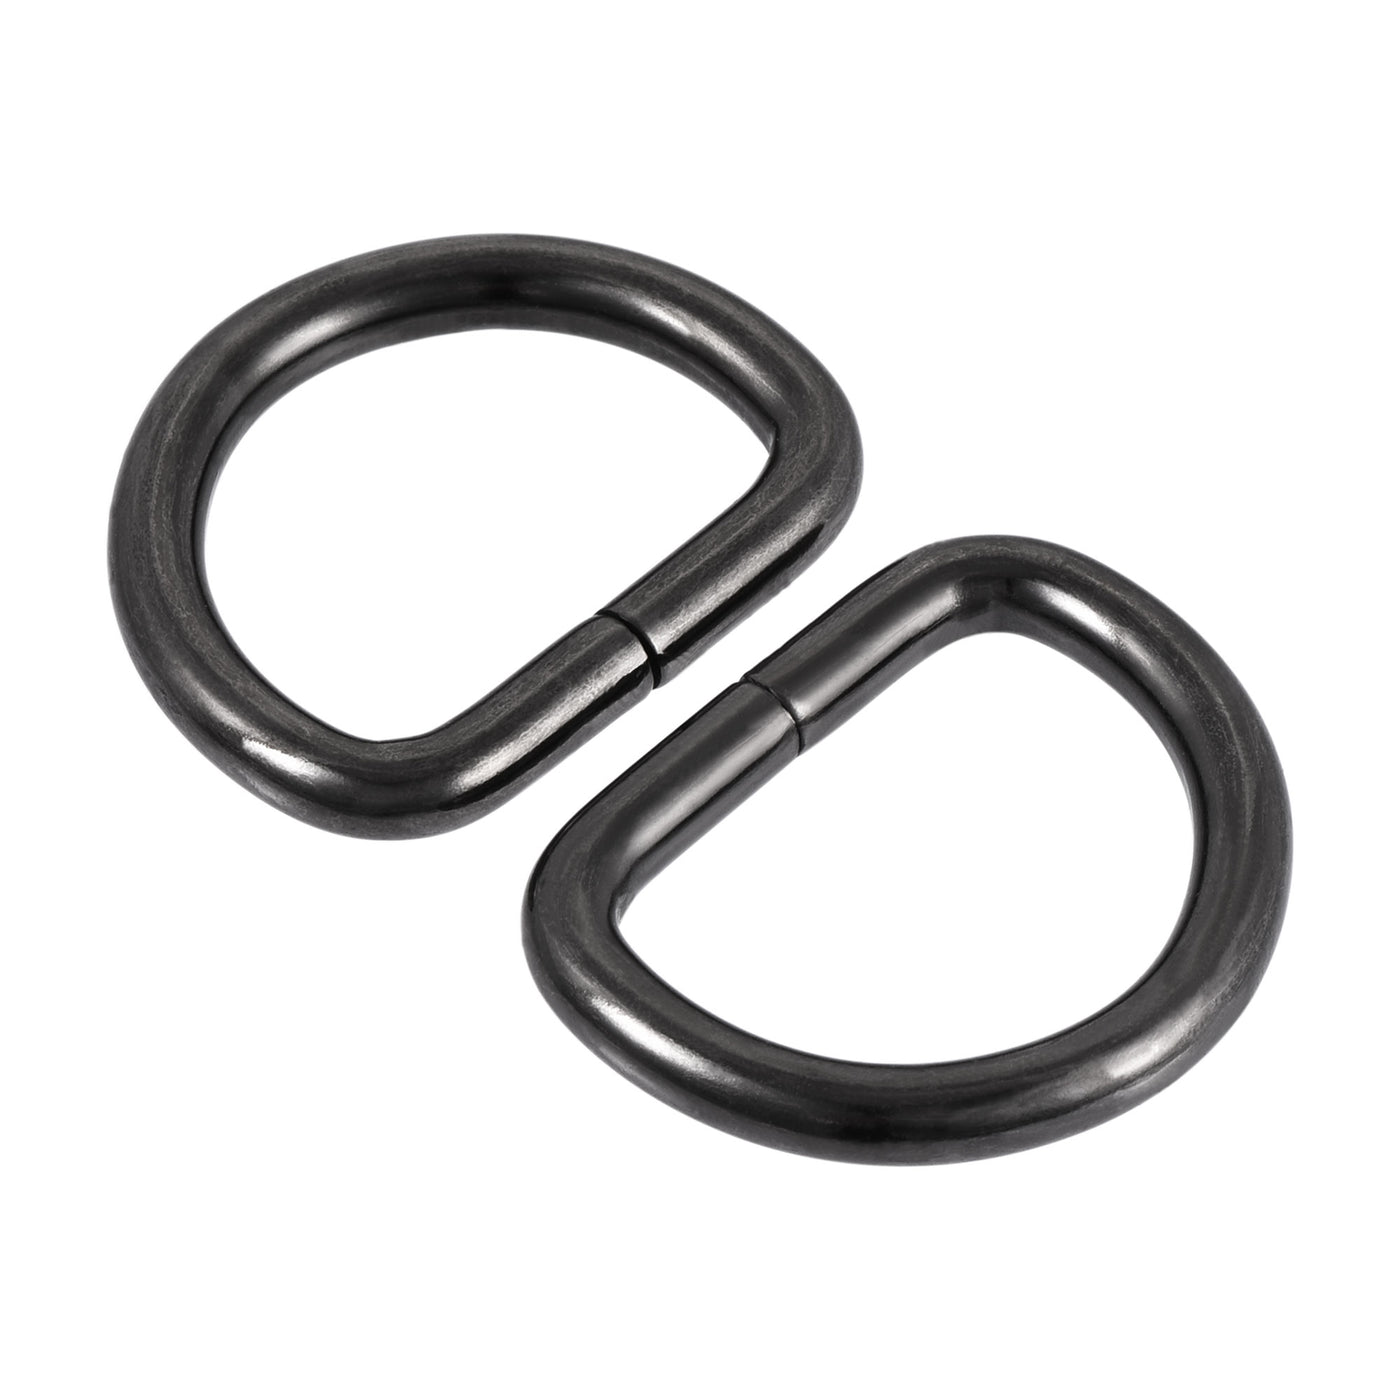 uxcell Uxcell Metal D Ring 0.98"(25mm) D-Rings Buckle for Hardware Bags Belts Craft DIY Accessories Black 20pcs